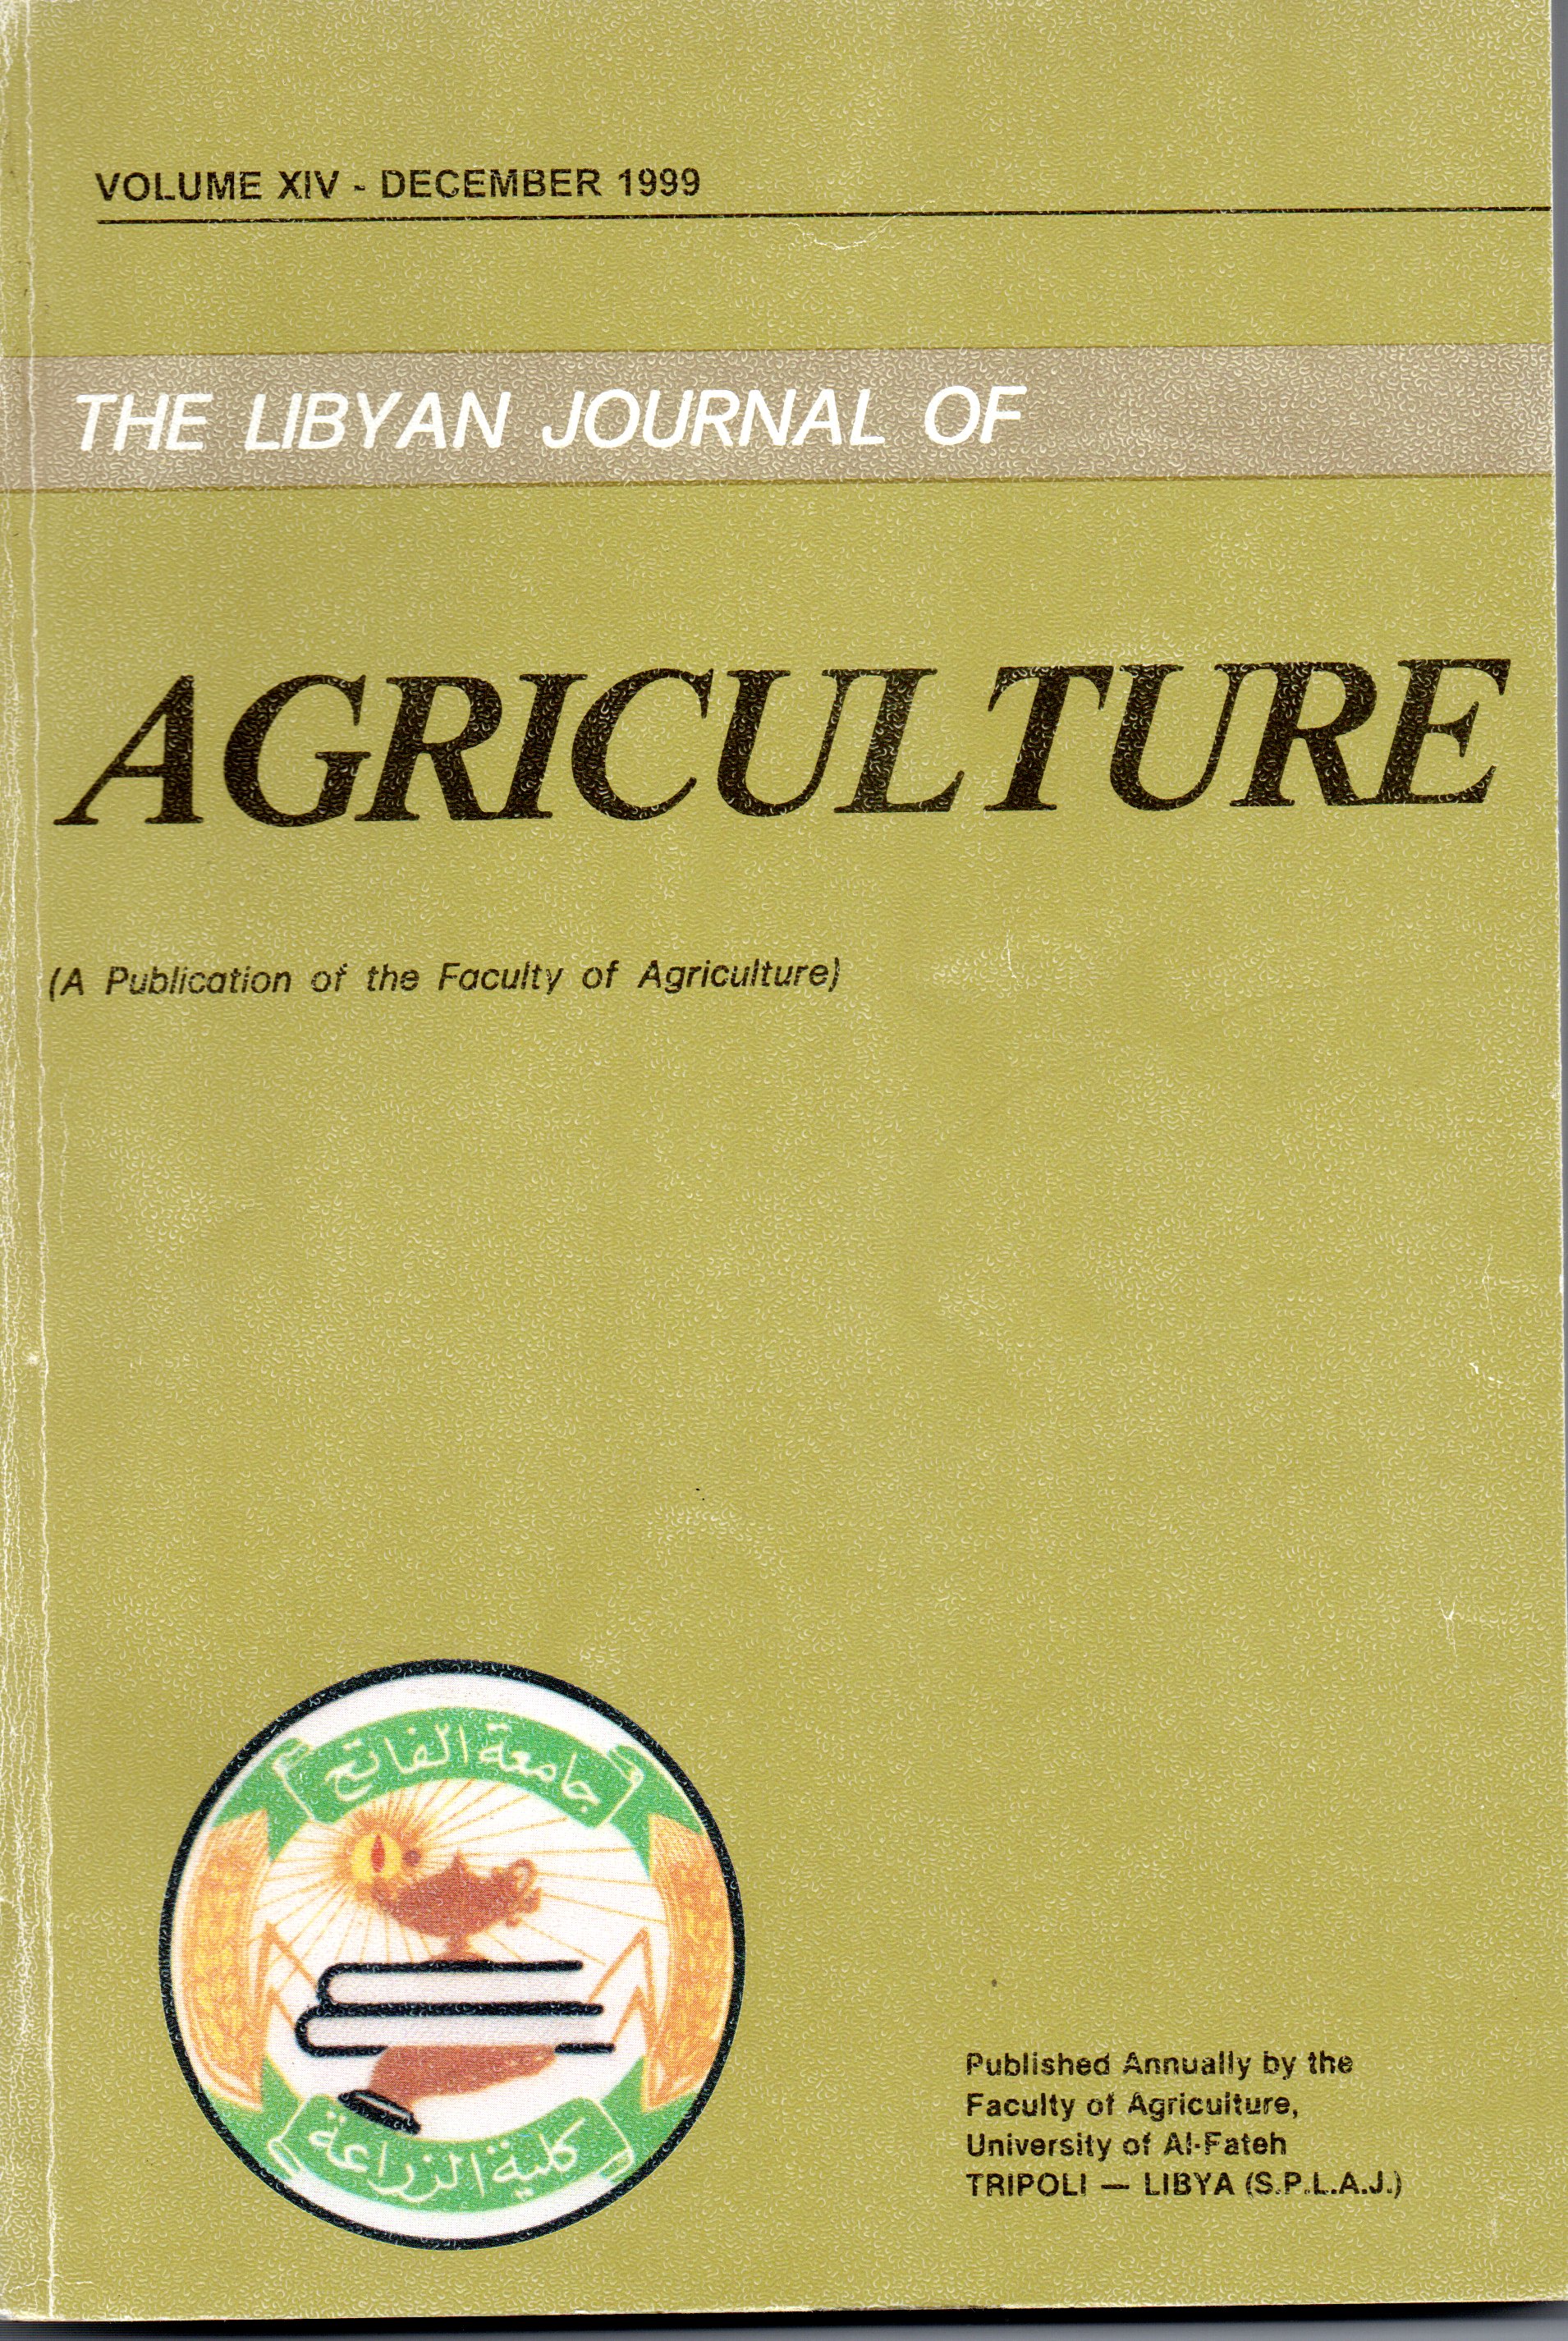 					View Vol. 14 No. 1 (1999): The Libyan Journal of Agriculture
				